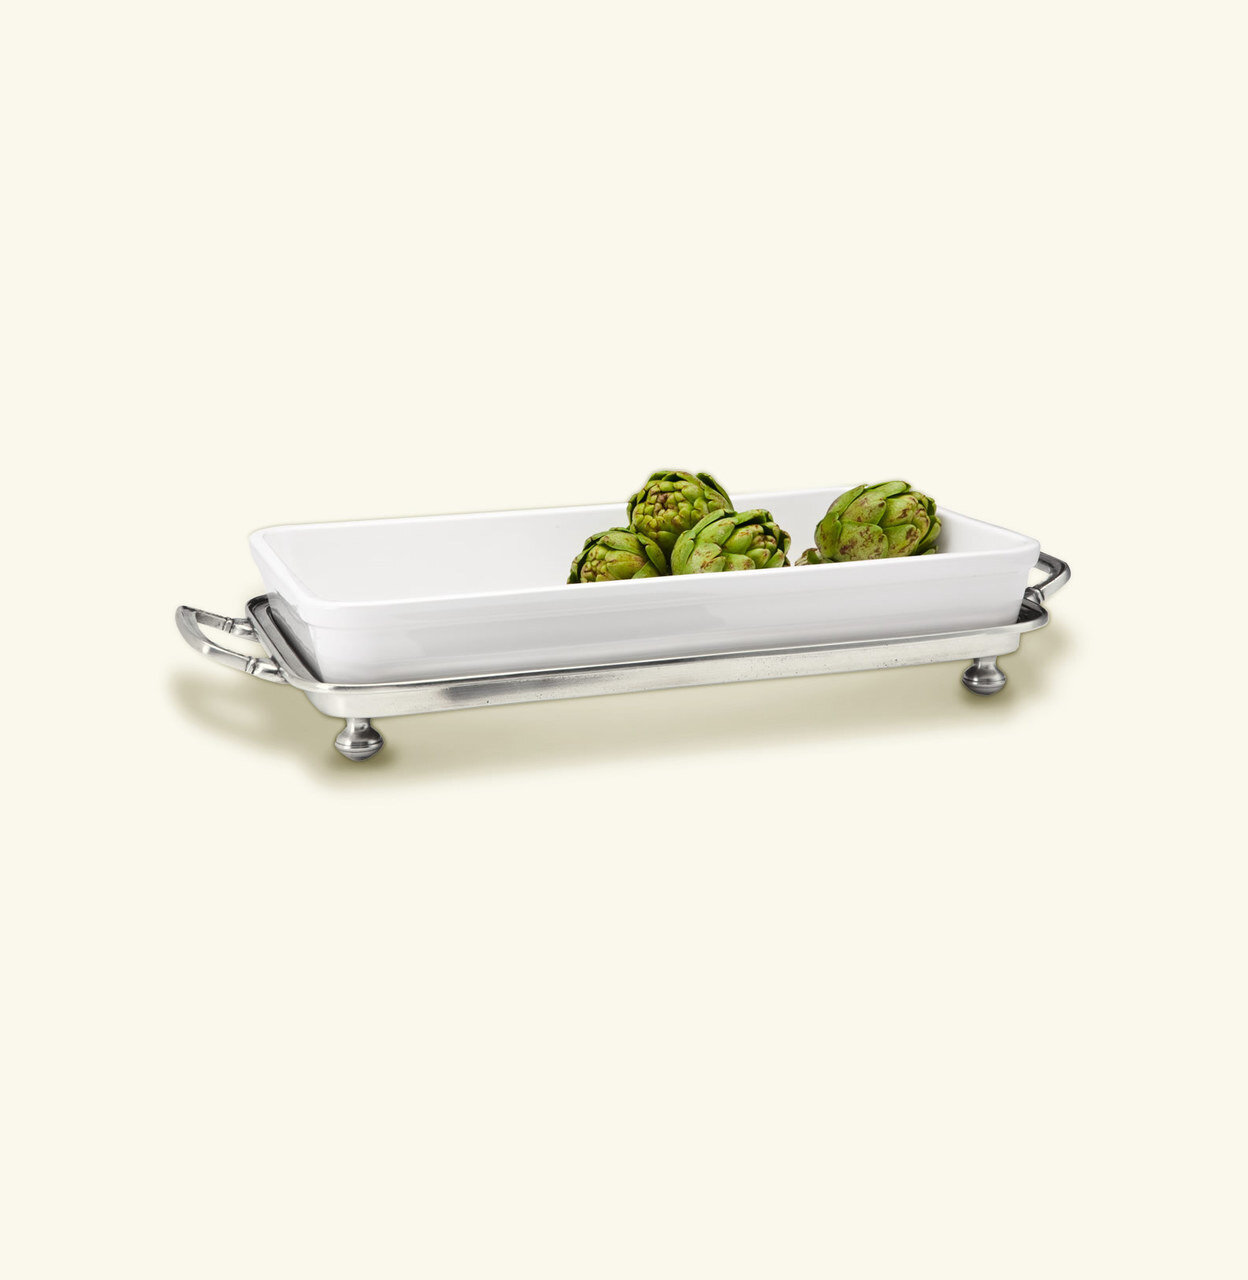 Match Pewter Convivio Baking Tray With Handles Ftd. White